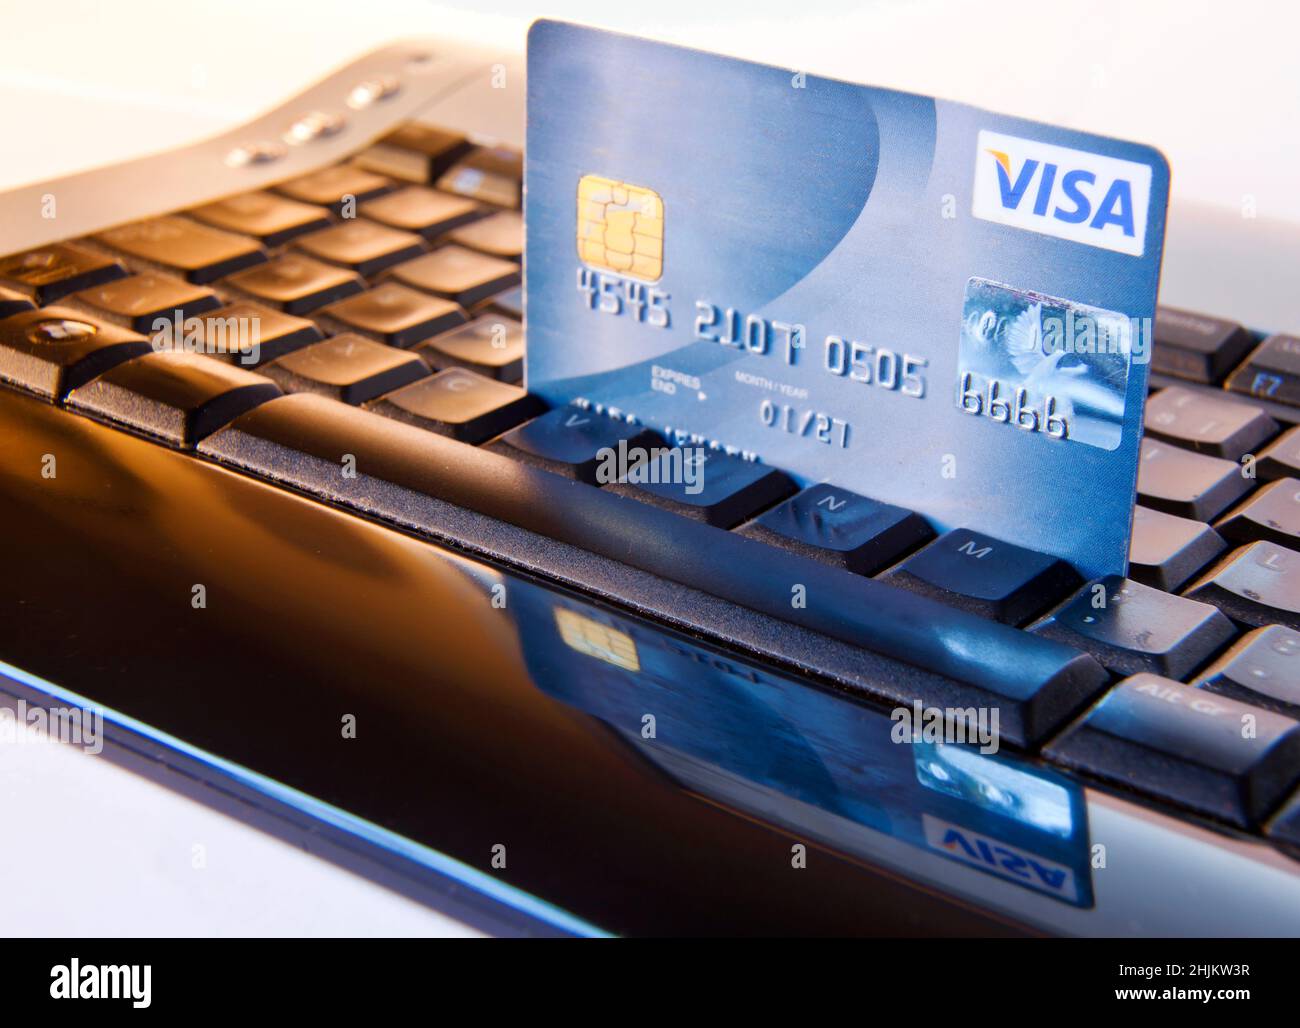 Web shop and credit card (numbers are changed). Keywords: pay buyer payment sale e-commerce order keys transaction transfer purchase booking booker se Stock Photo